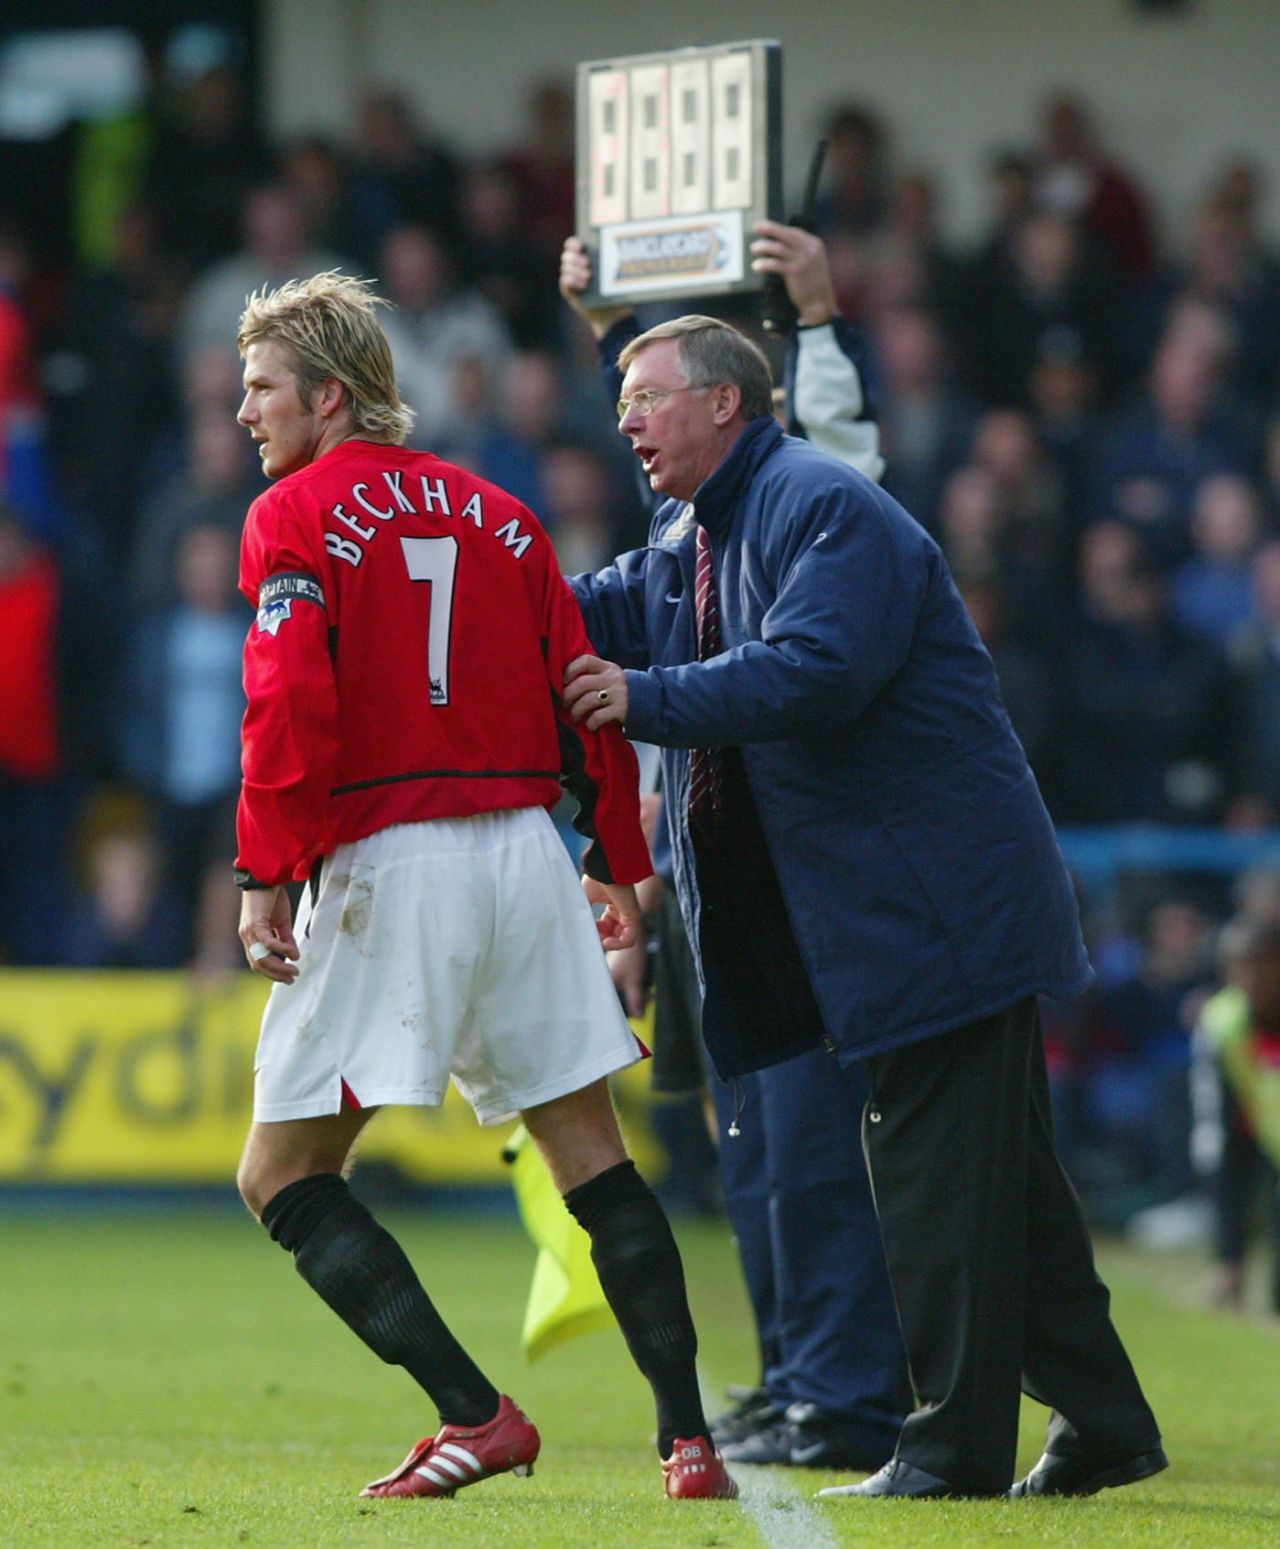 Alex Ferguson brought Beckham into United's first team as part of the now venerated "Class of '92" youth side. They won six Premier League titles together but their relationship deteriorated as Beckham's celebrity persona blossomed -- and the Scottish manager's infamous kicking of a boot into the player's head in the Old Trafford dressing-room after an FA Cup defeat in 2003 precipitated his move to Real Madrid.